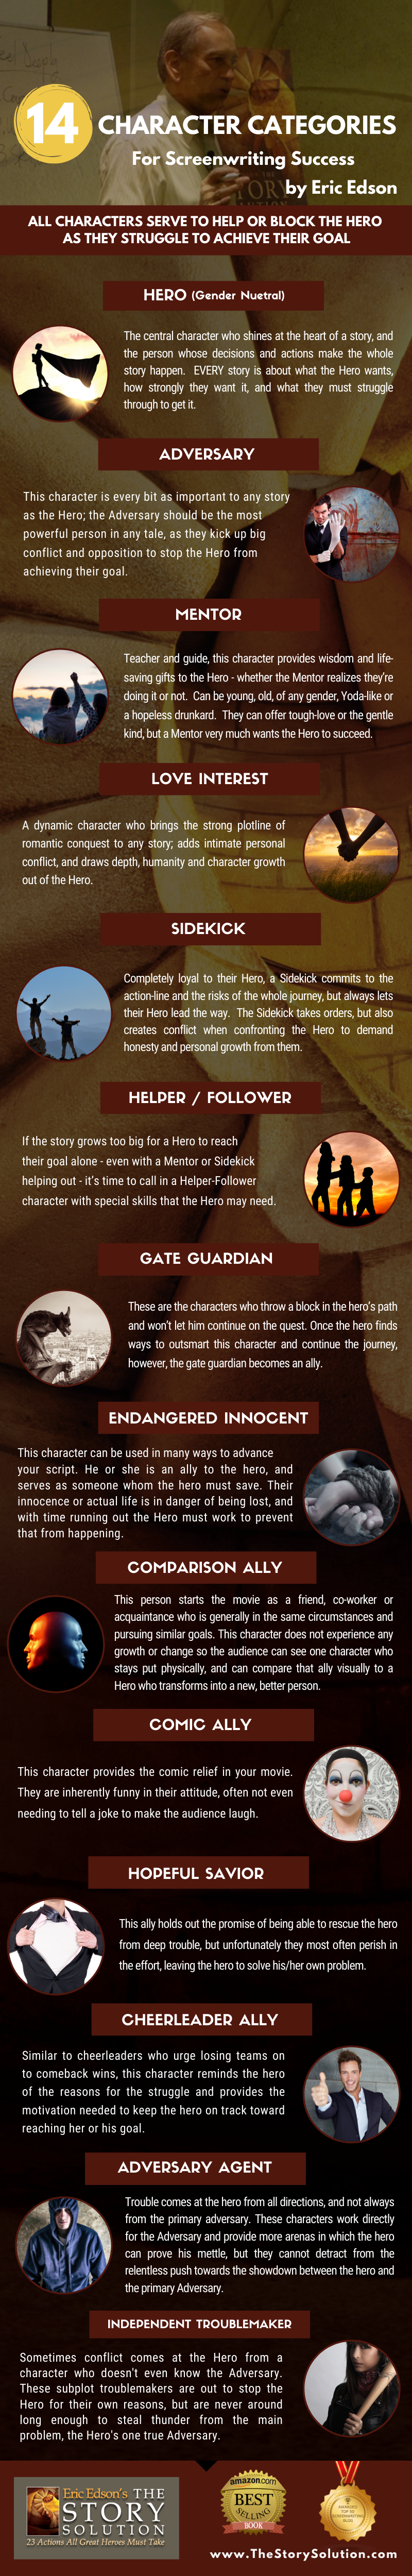 14 Character Categories For Screenwriting Success - Screenwriting Infographic - By Eric Edson